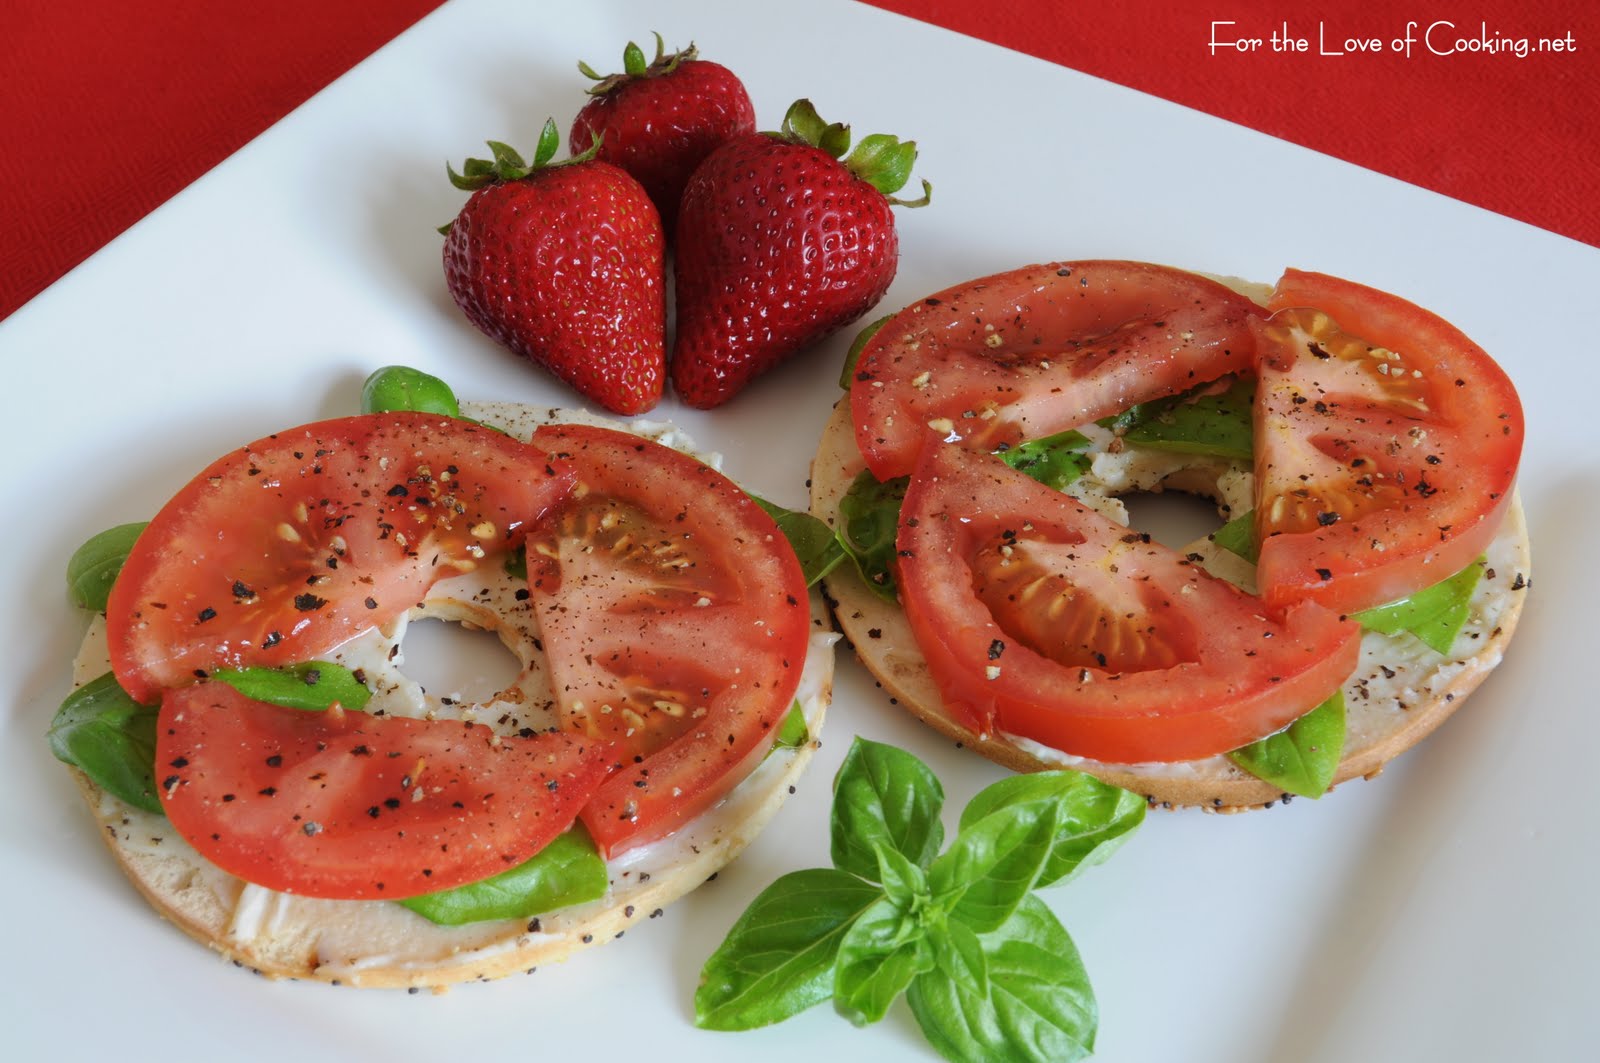 Tomato and Basil Sandwich with a Twist